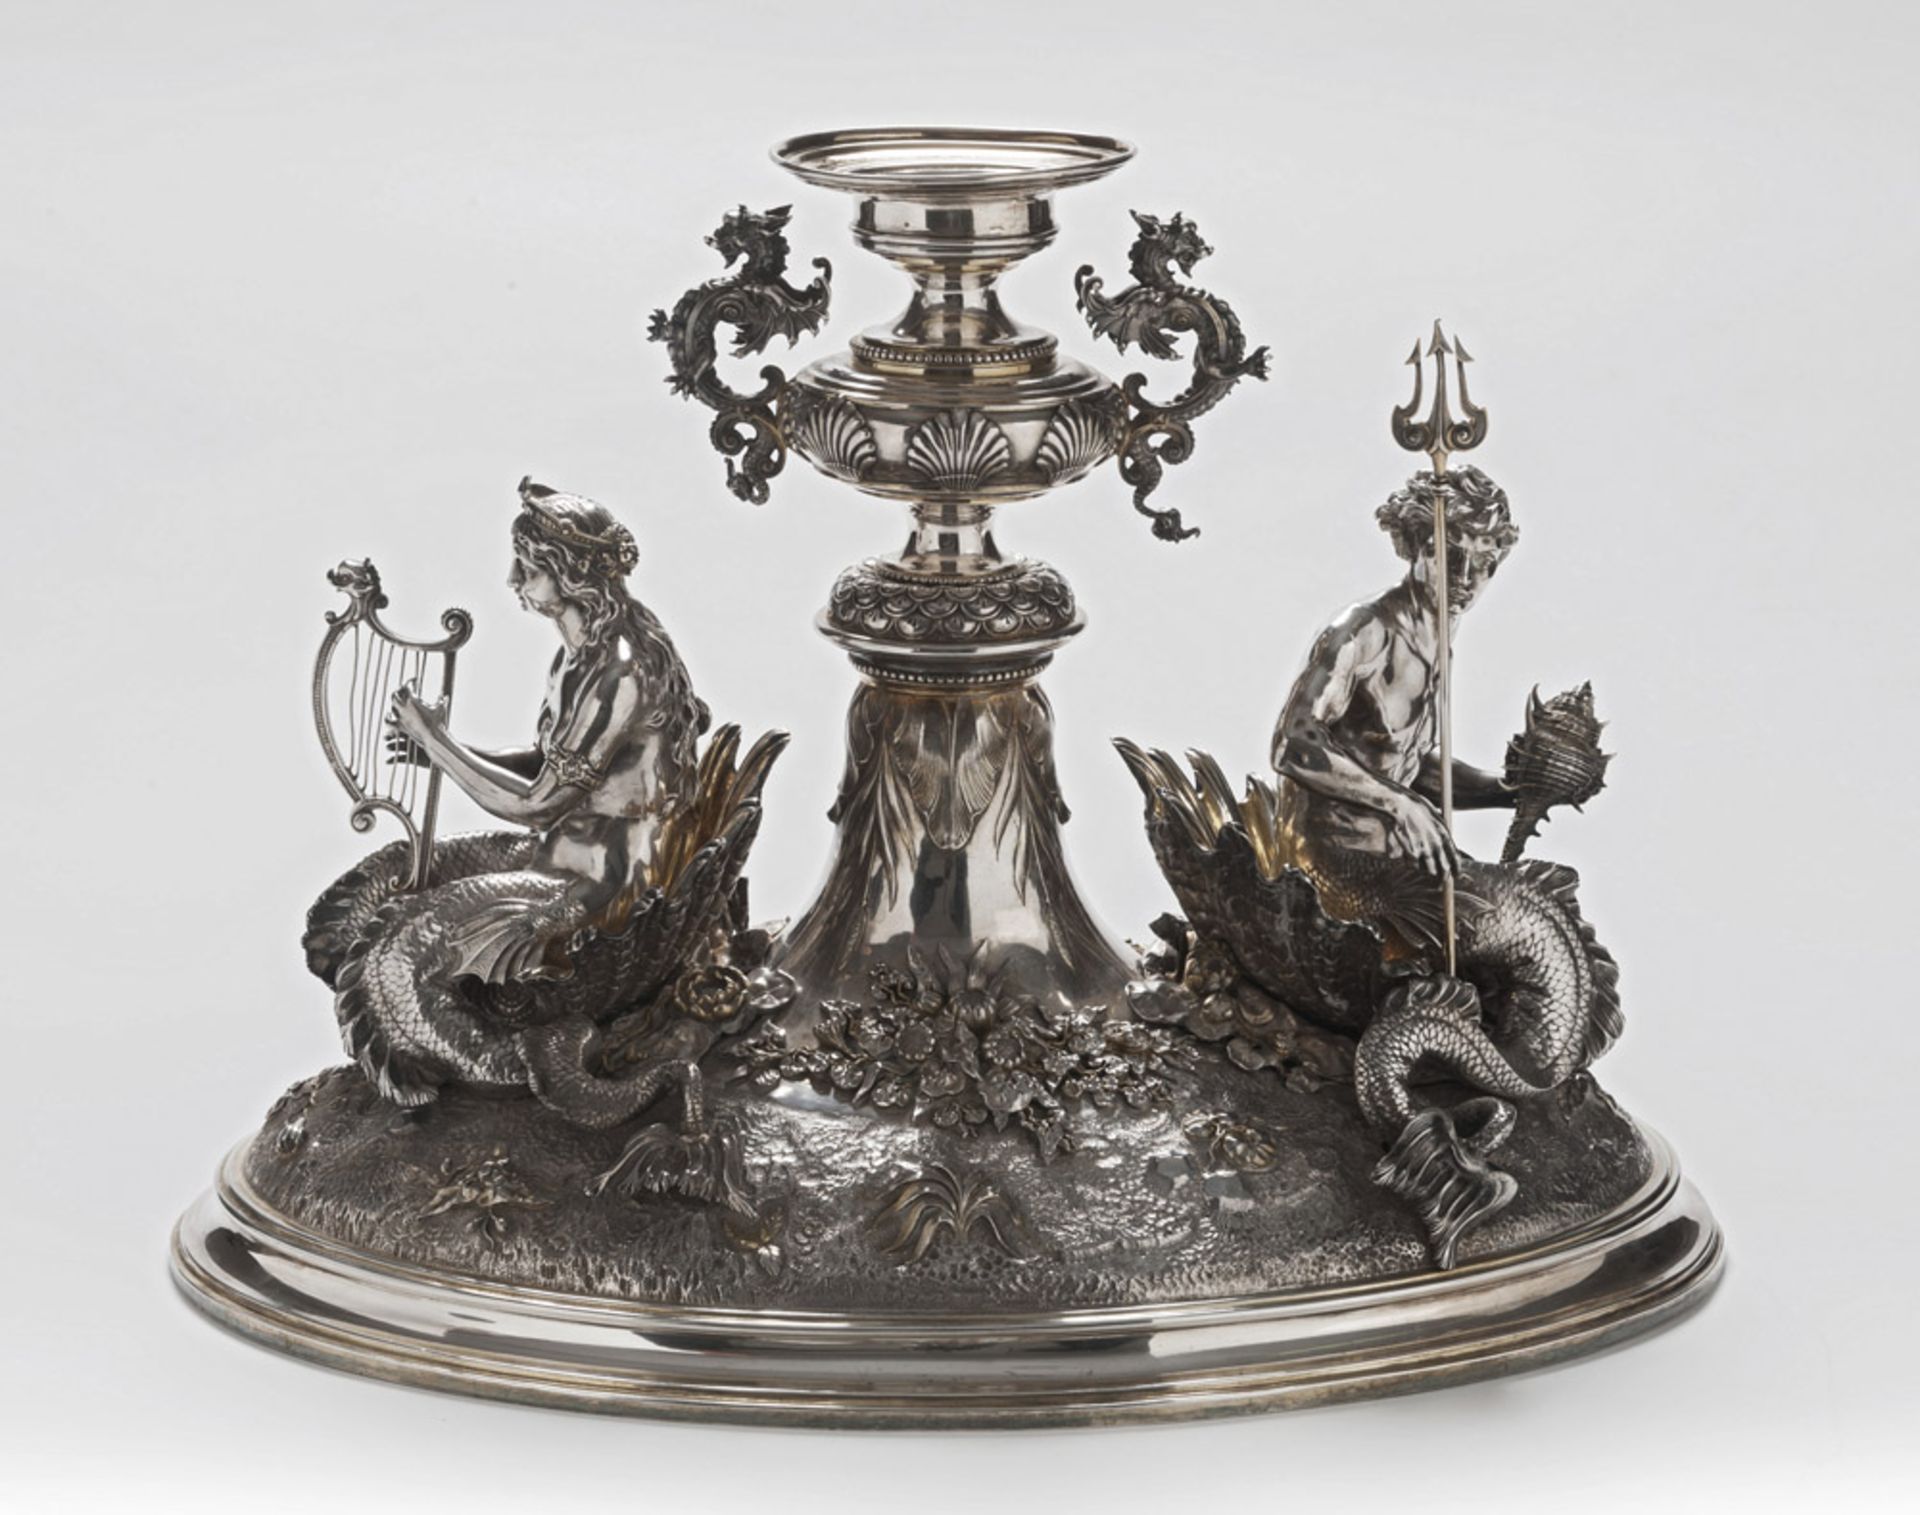 BEAUTIFUL SILVER CENTERPIECE, PROBABLY ITALY EARLY 20TH CENTURY with central candlestick decoraed by